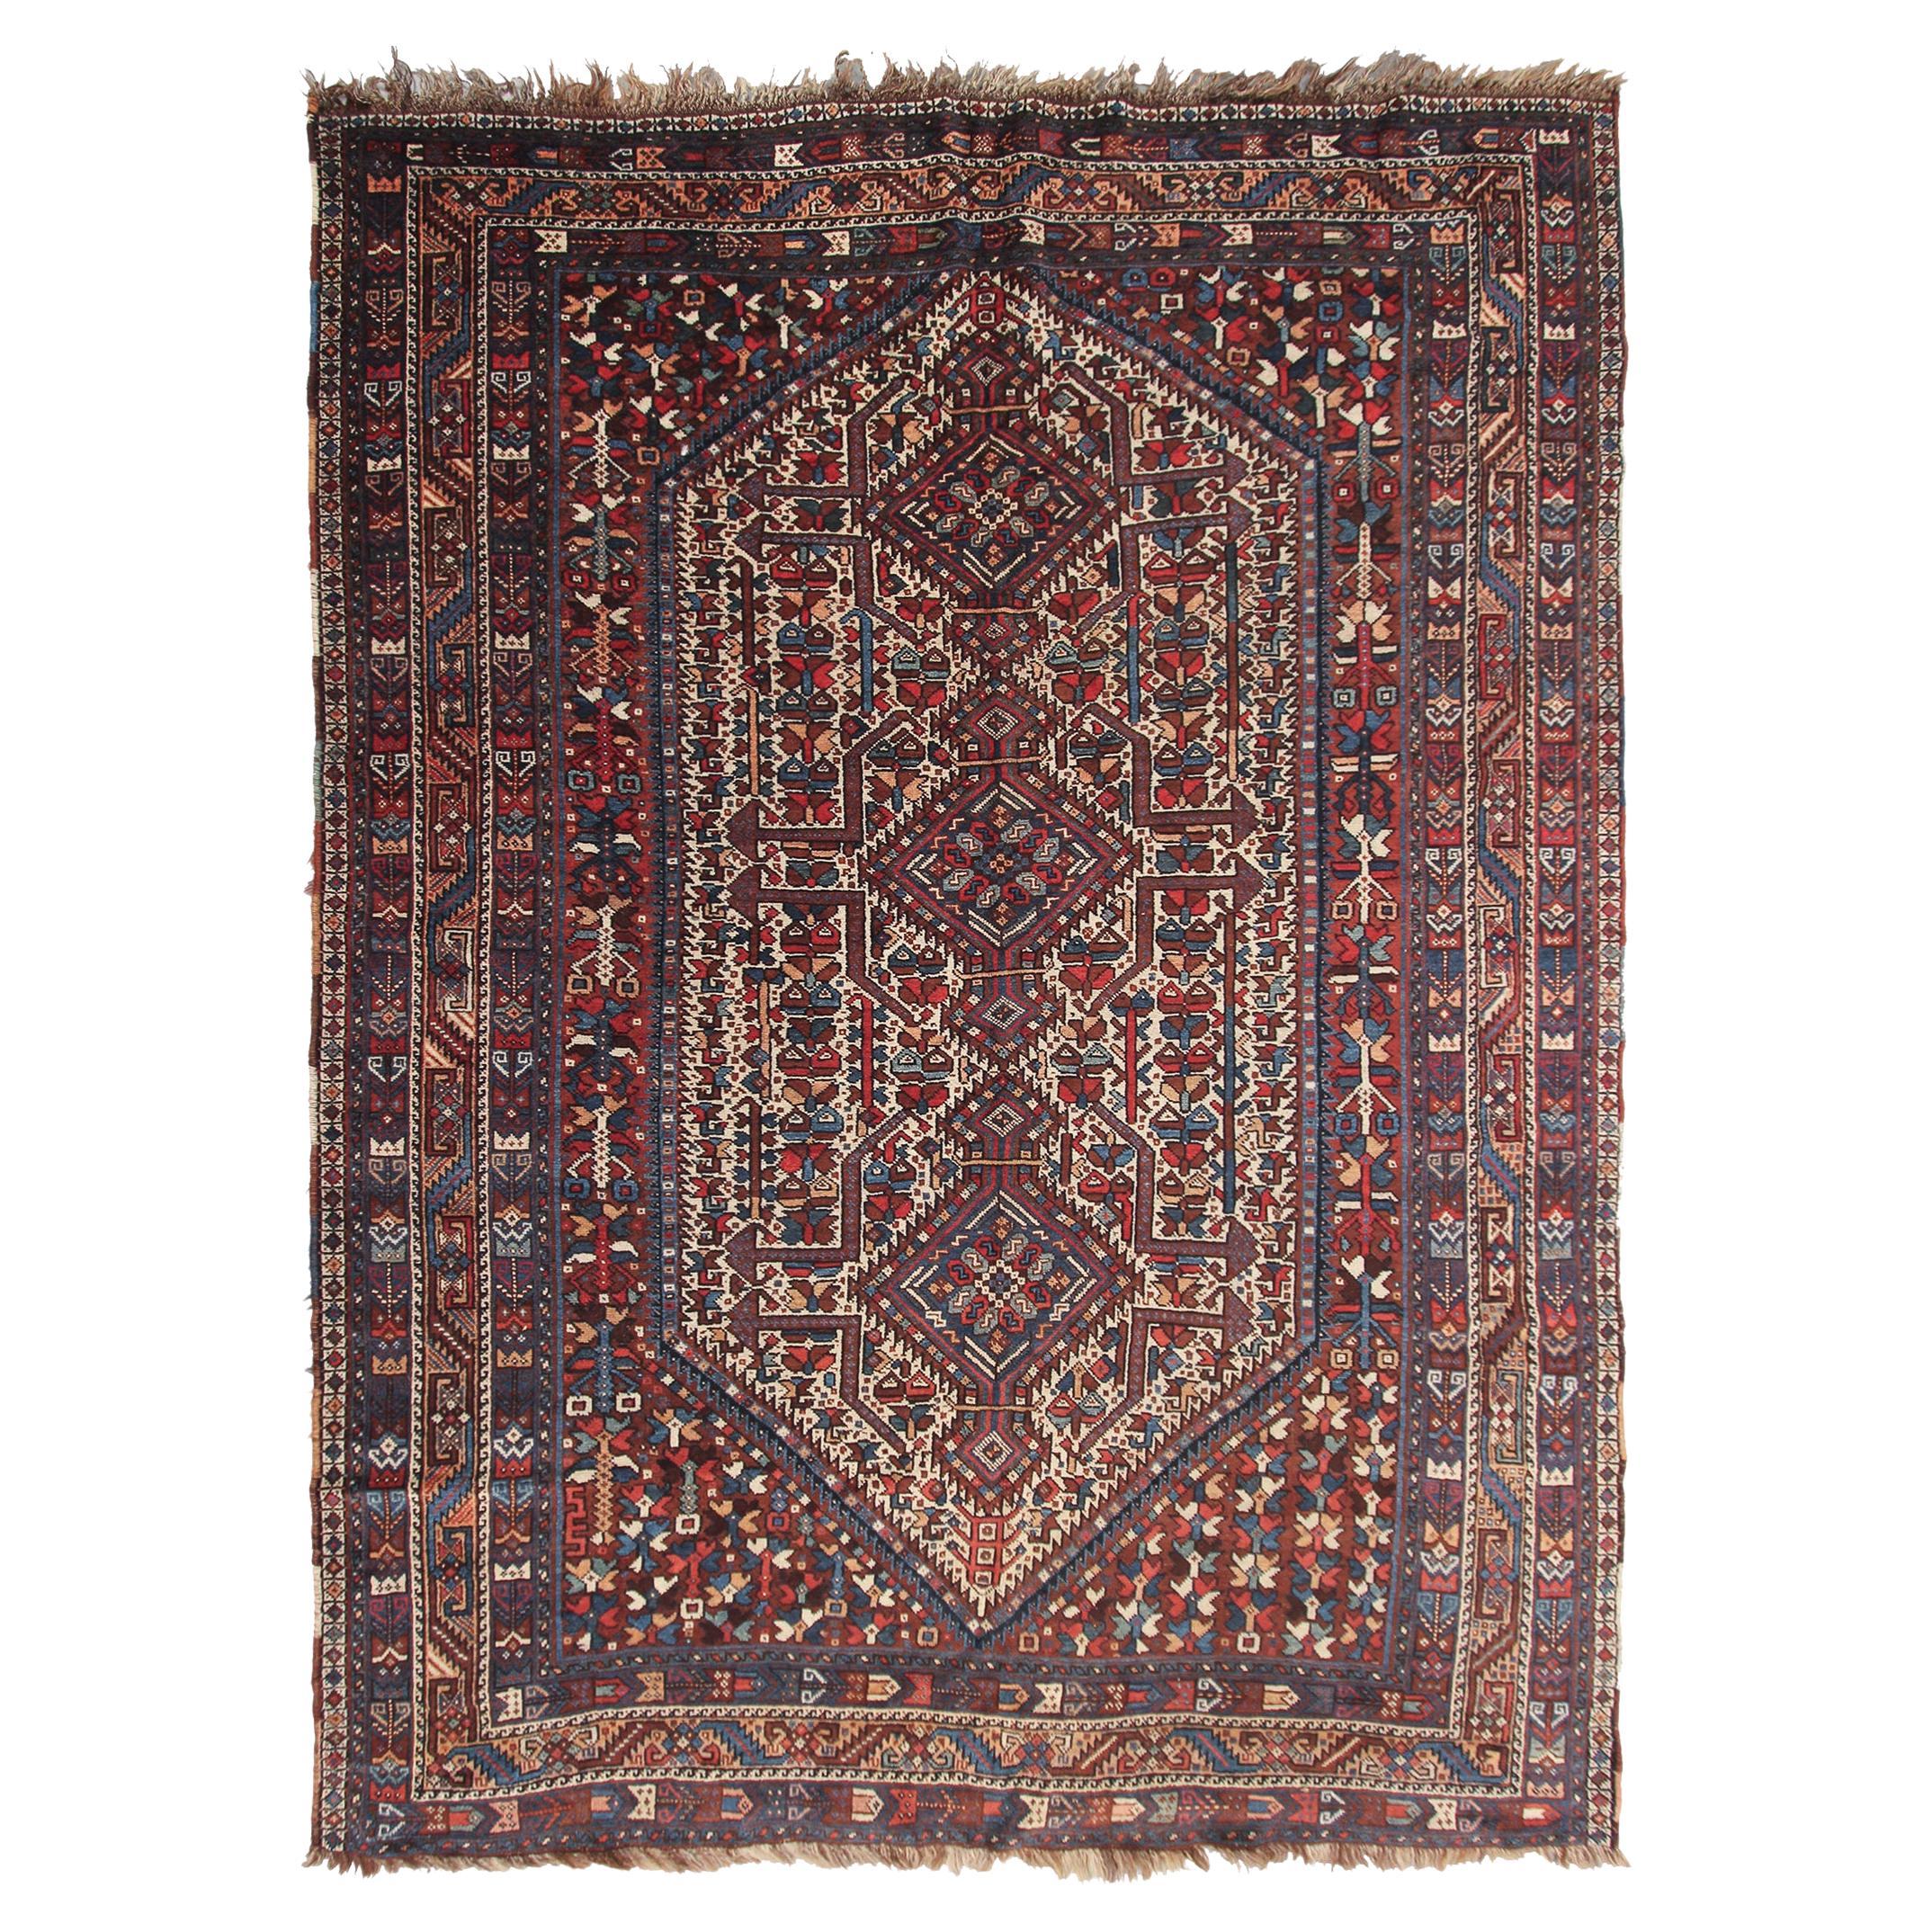 Antique Persian Rug Antique Shiraz Rug Tribal Geometric Overall Wool Found